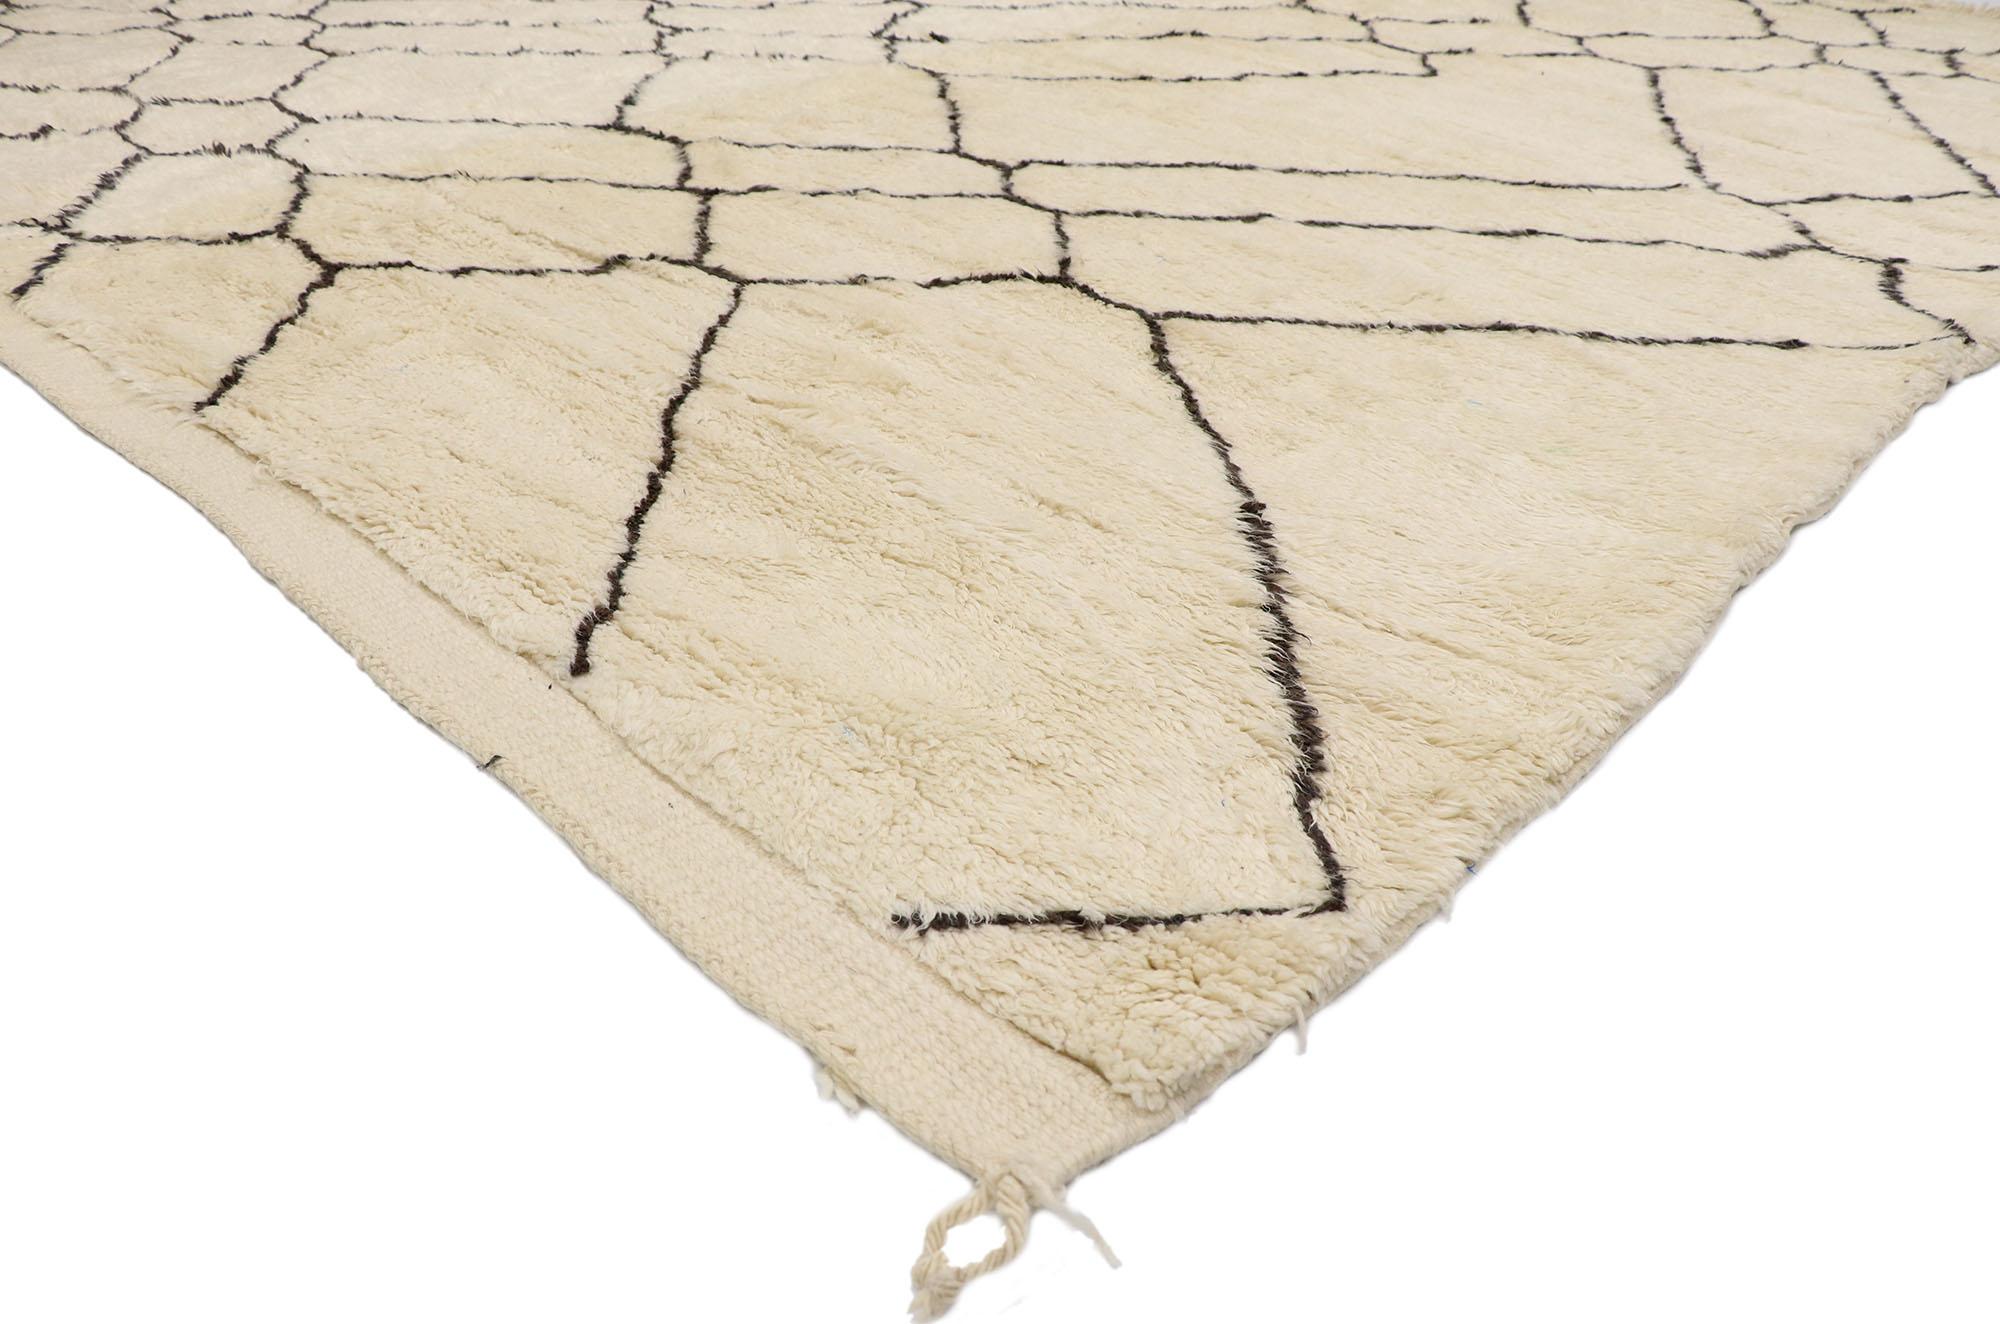 21097 New Contemporary Berber Moroccan rug with minimalist style 10'03 x 11'09. With its balanced asymmetry, simplicity, and plush pile, this hand knotted wool contemporary Moroccan rug displays all the intrigue of minimalist style. The abrashed